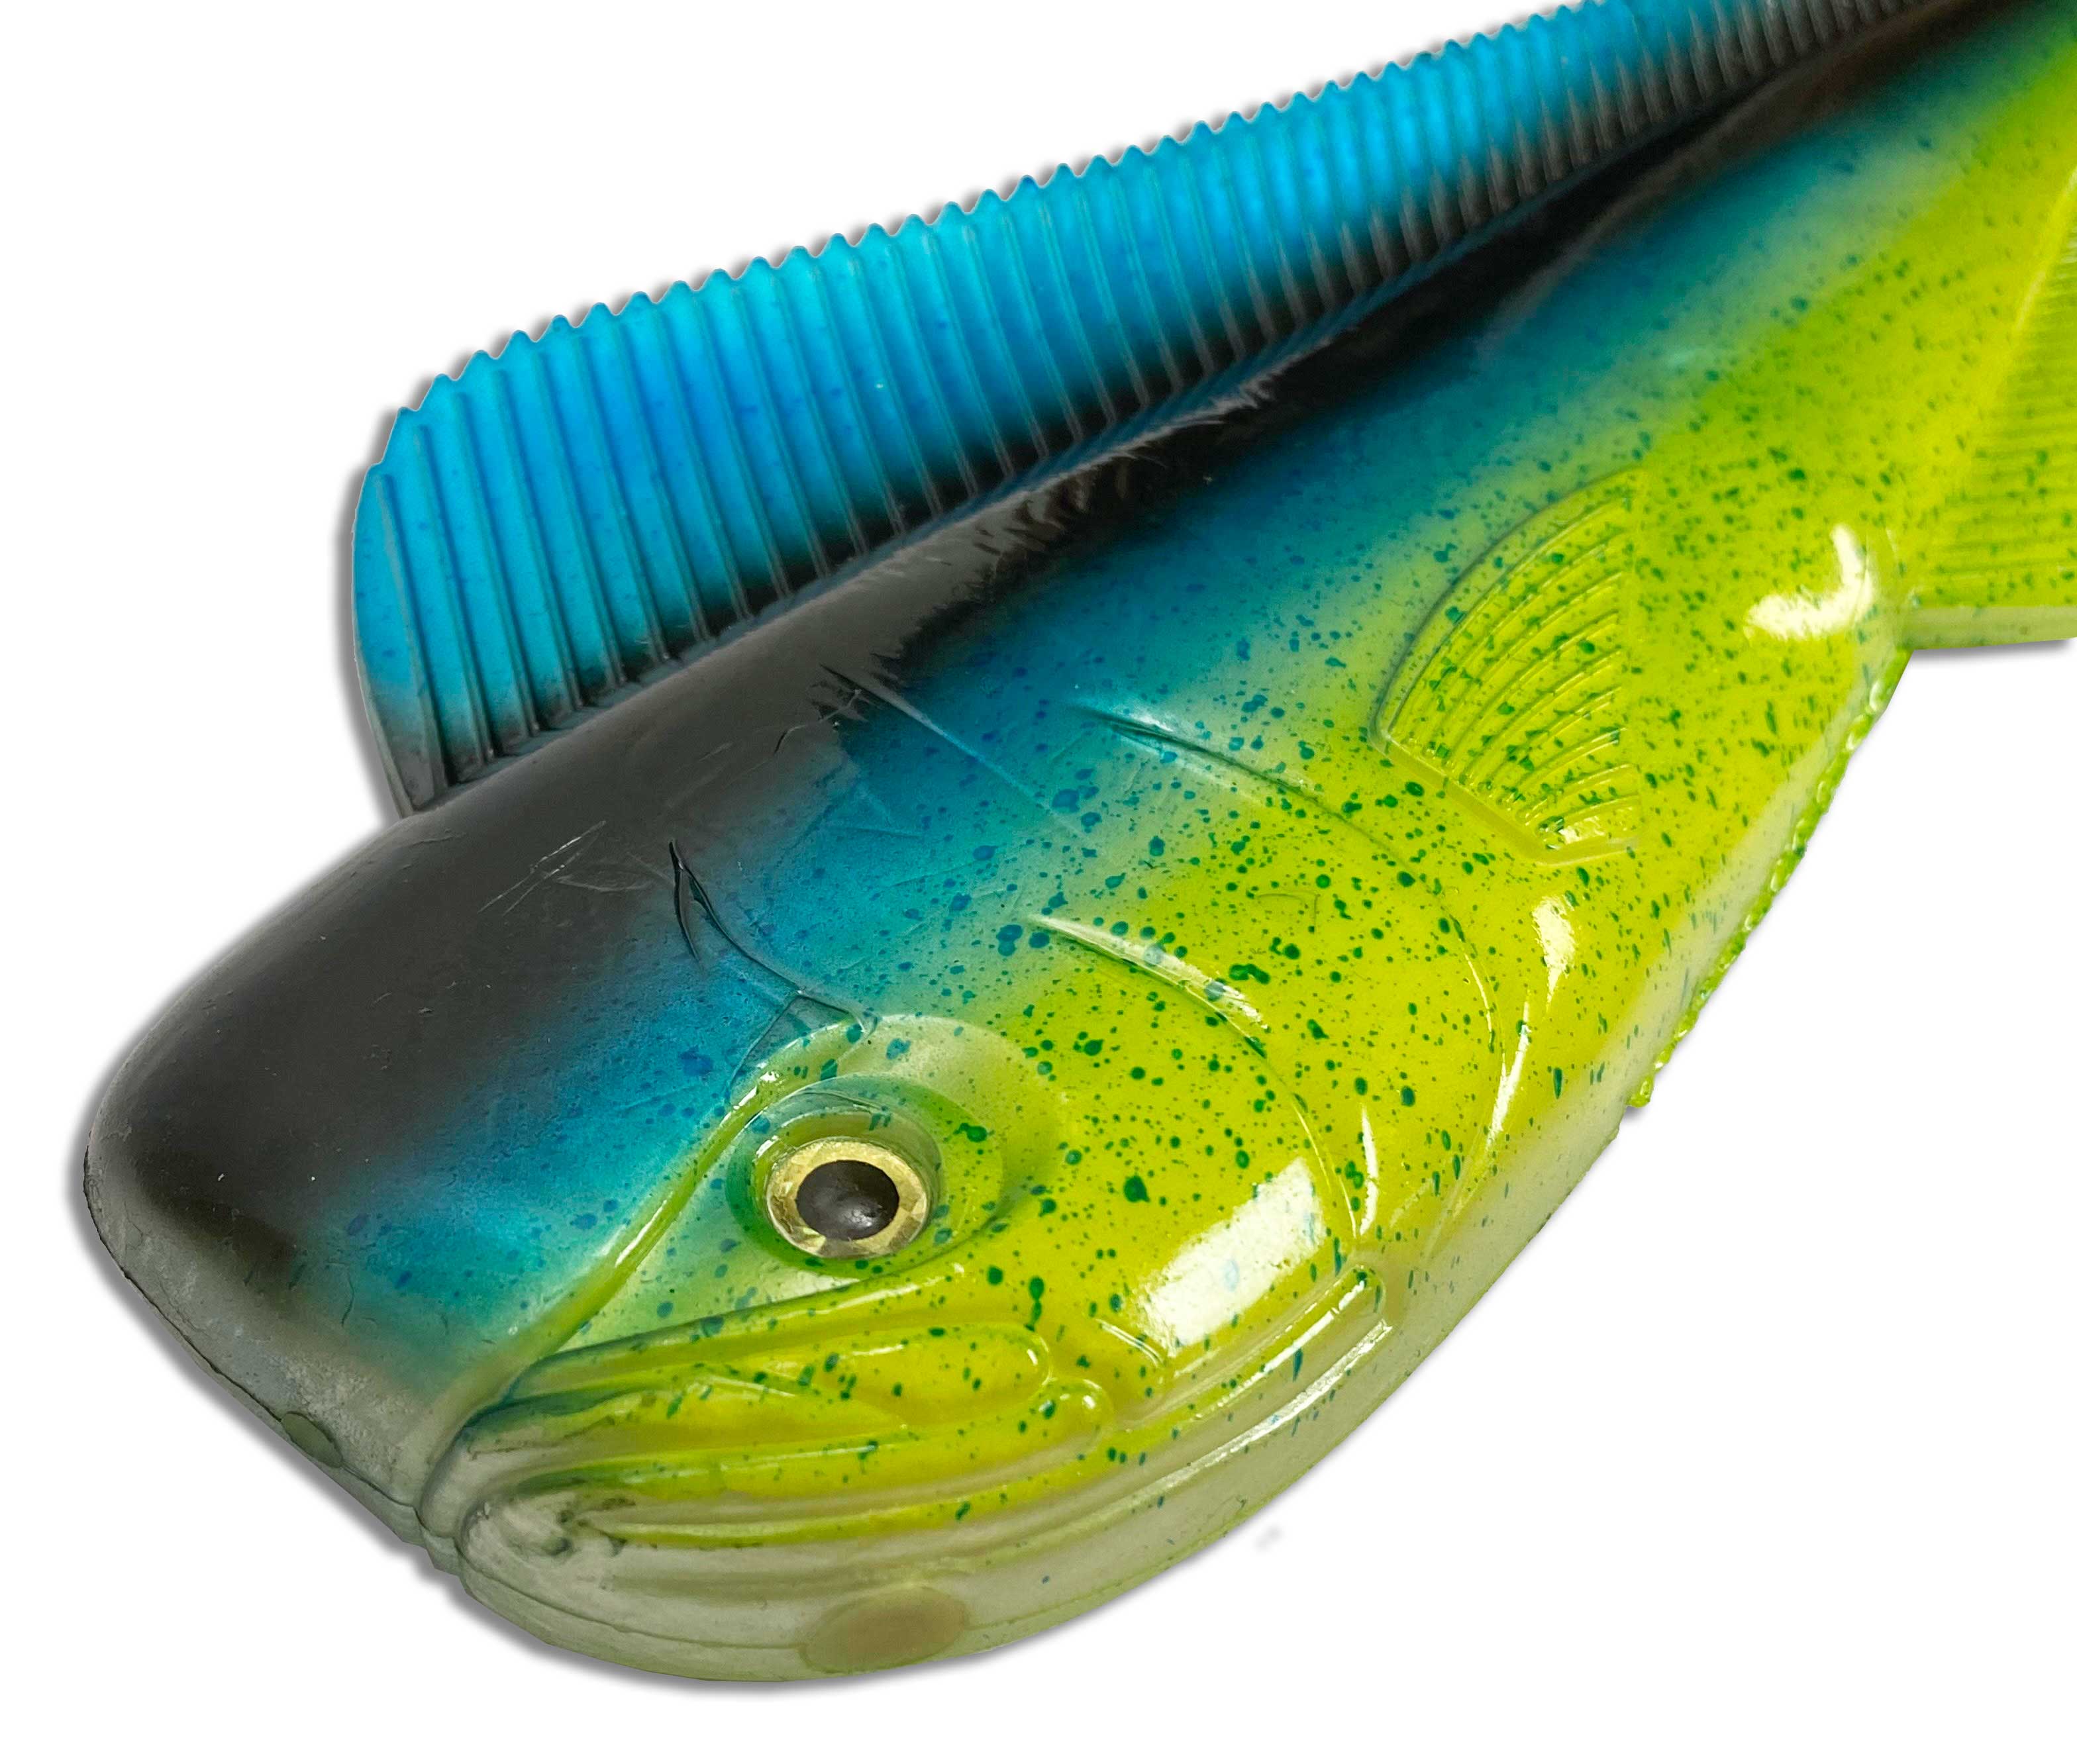 Artificial Mahi 12" Blue/Green/Yellow - Almost Alive Lures - Click Image to Close